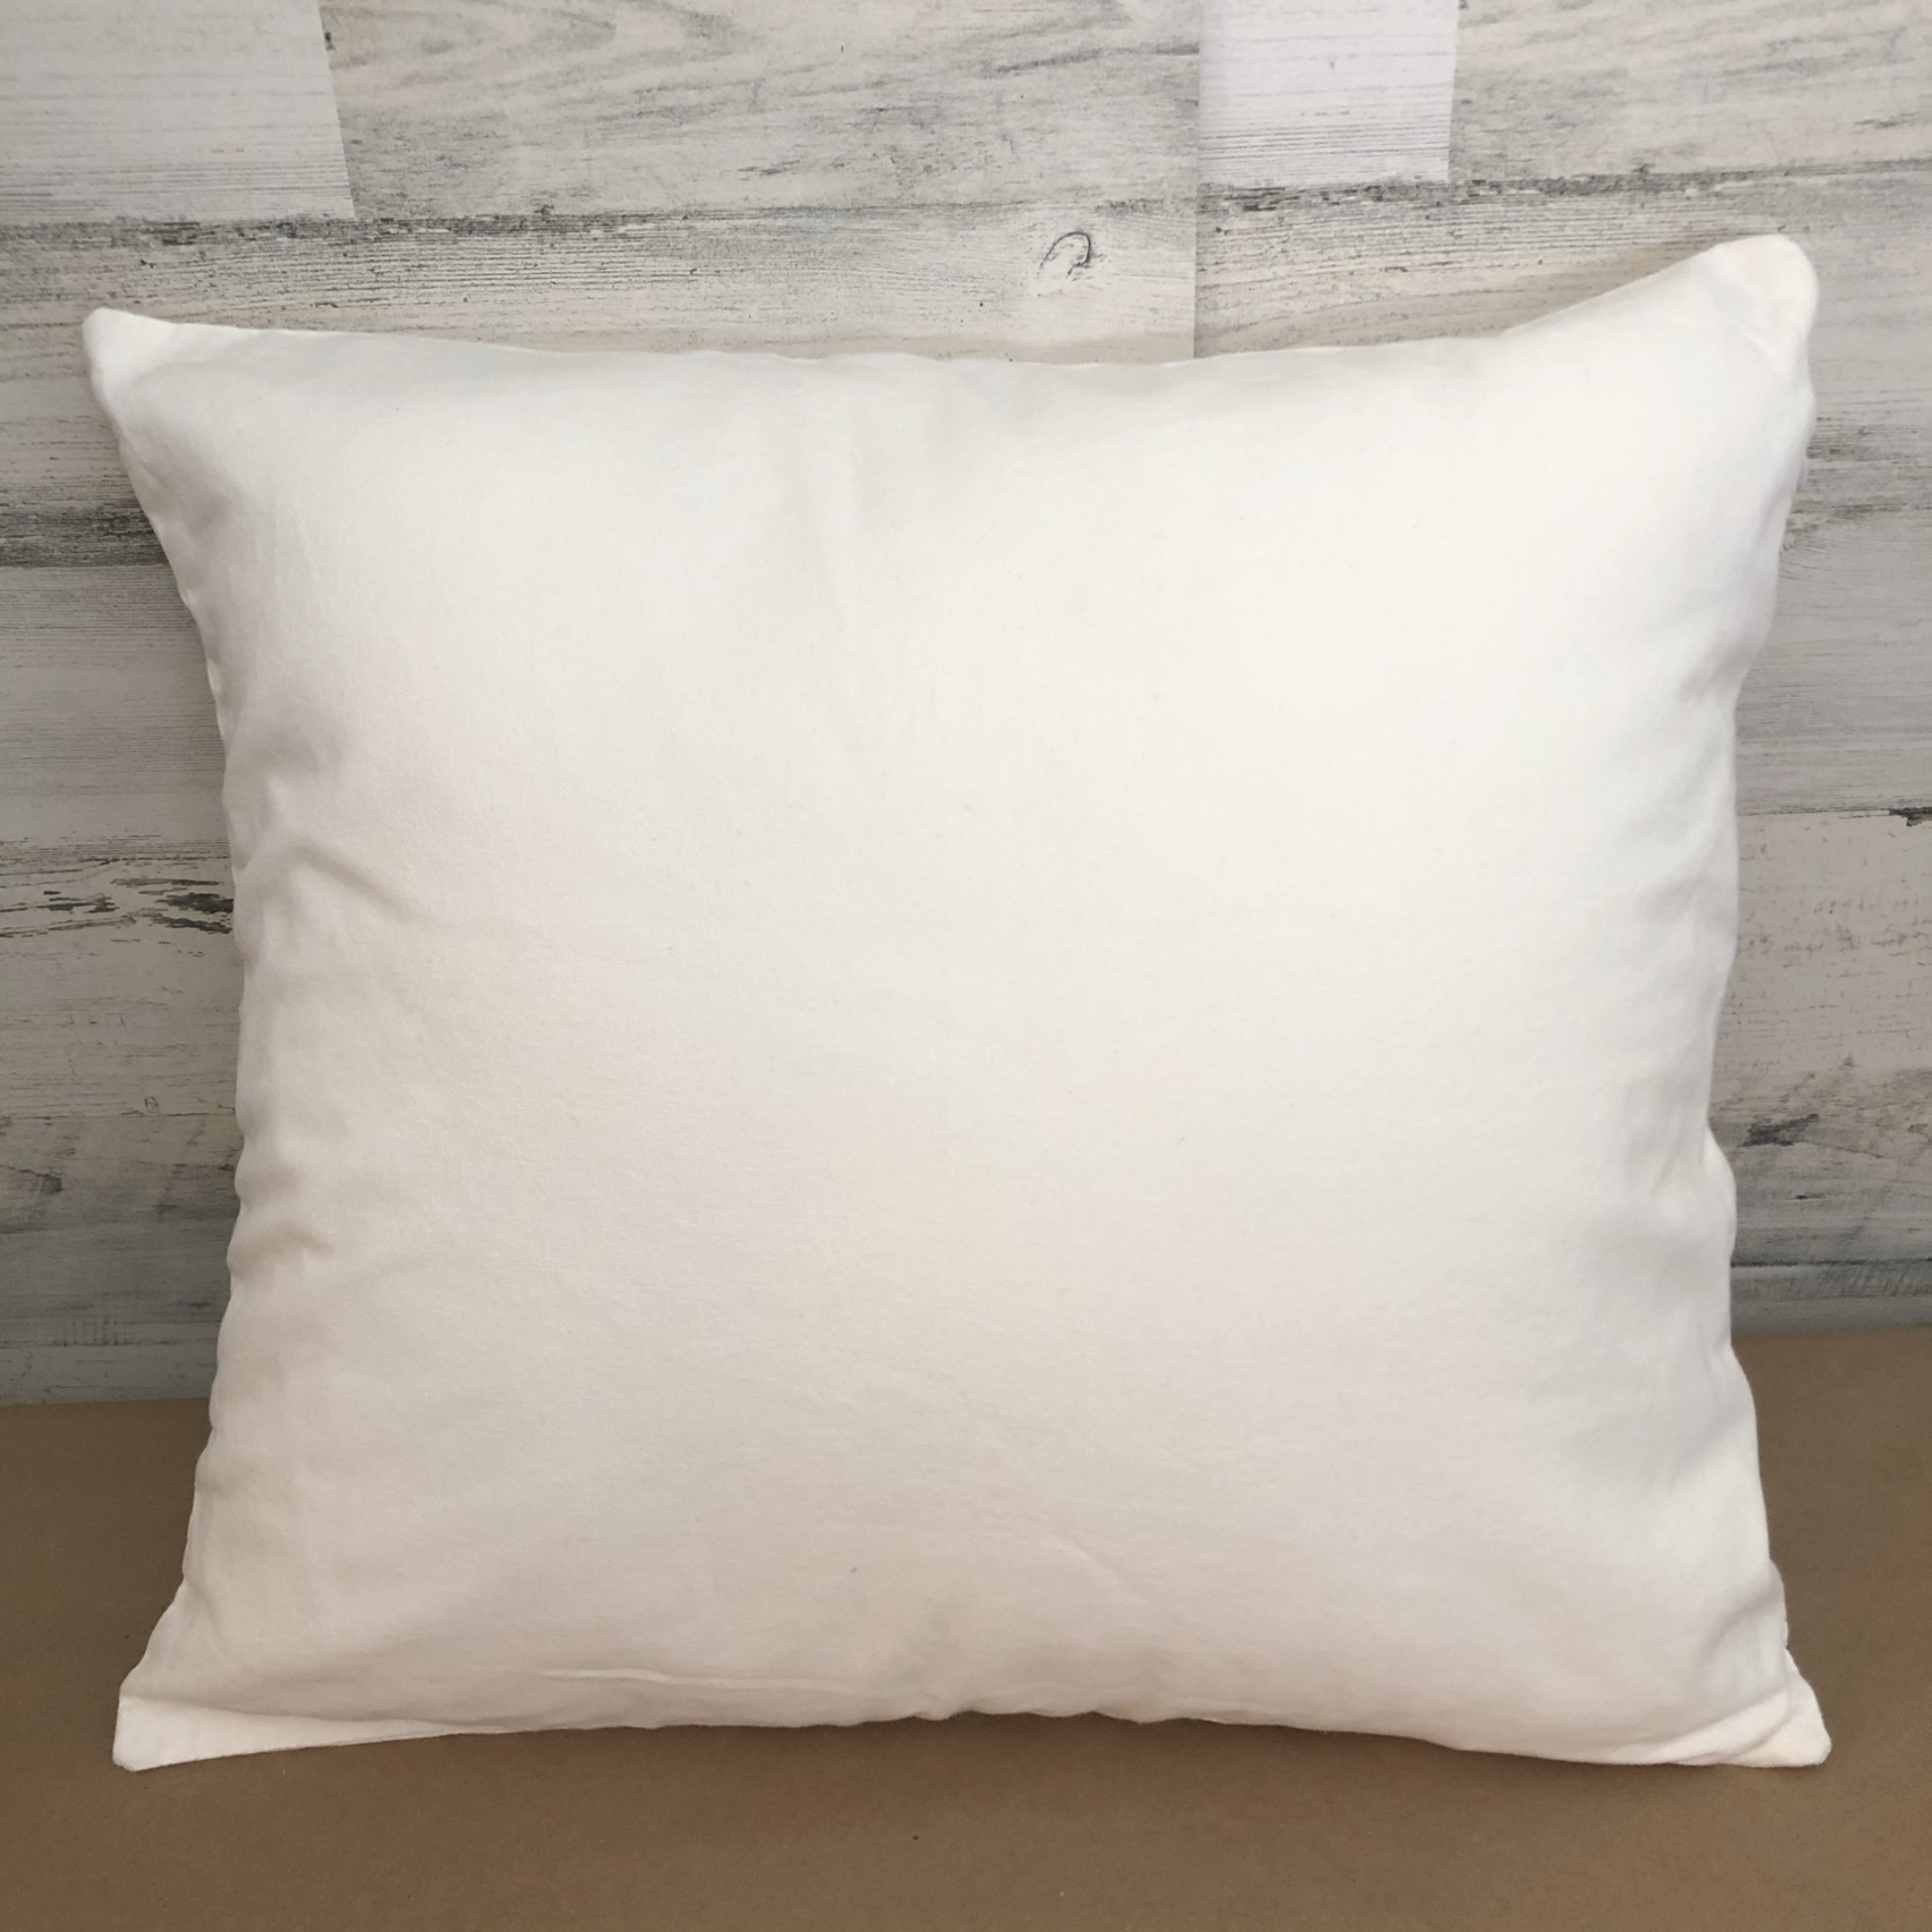 Example of Canvas pillow cover in Natural white on 20" x 20" pillow insert at Milton's Daughter